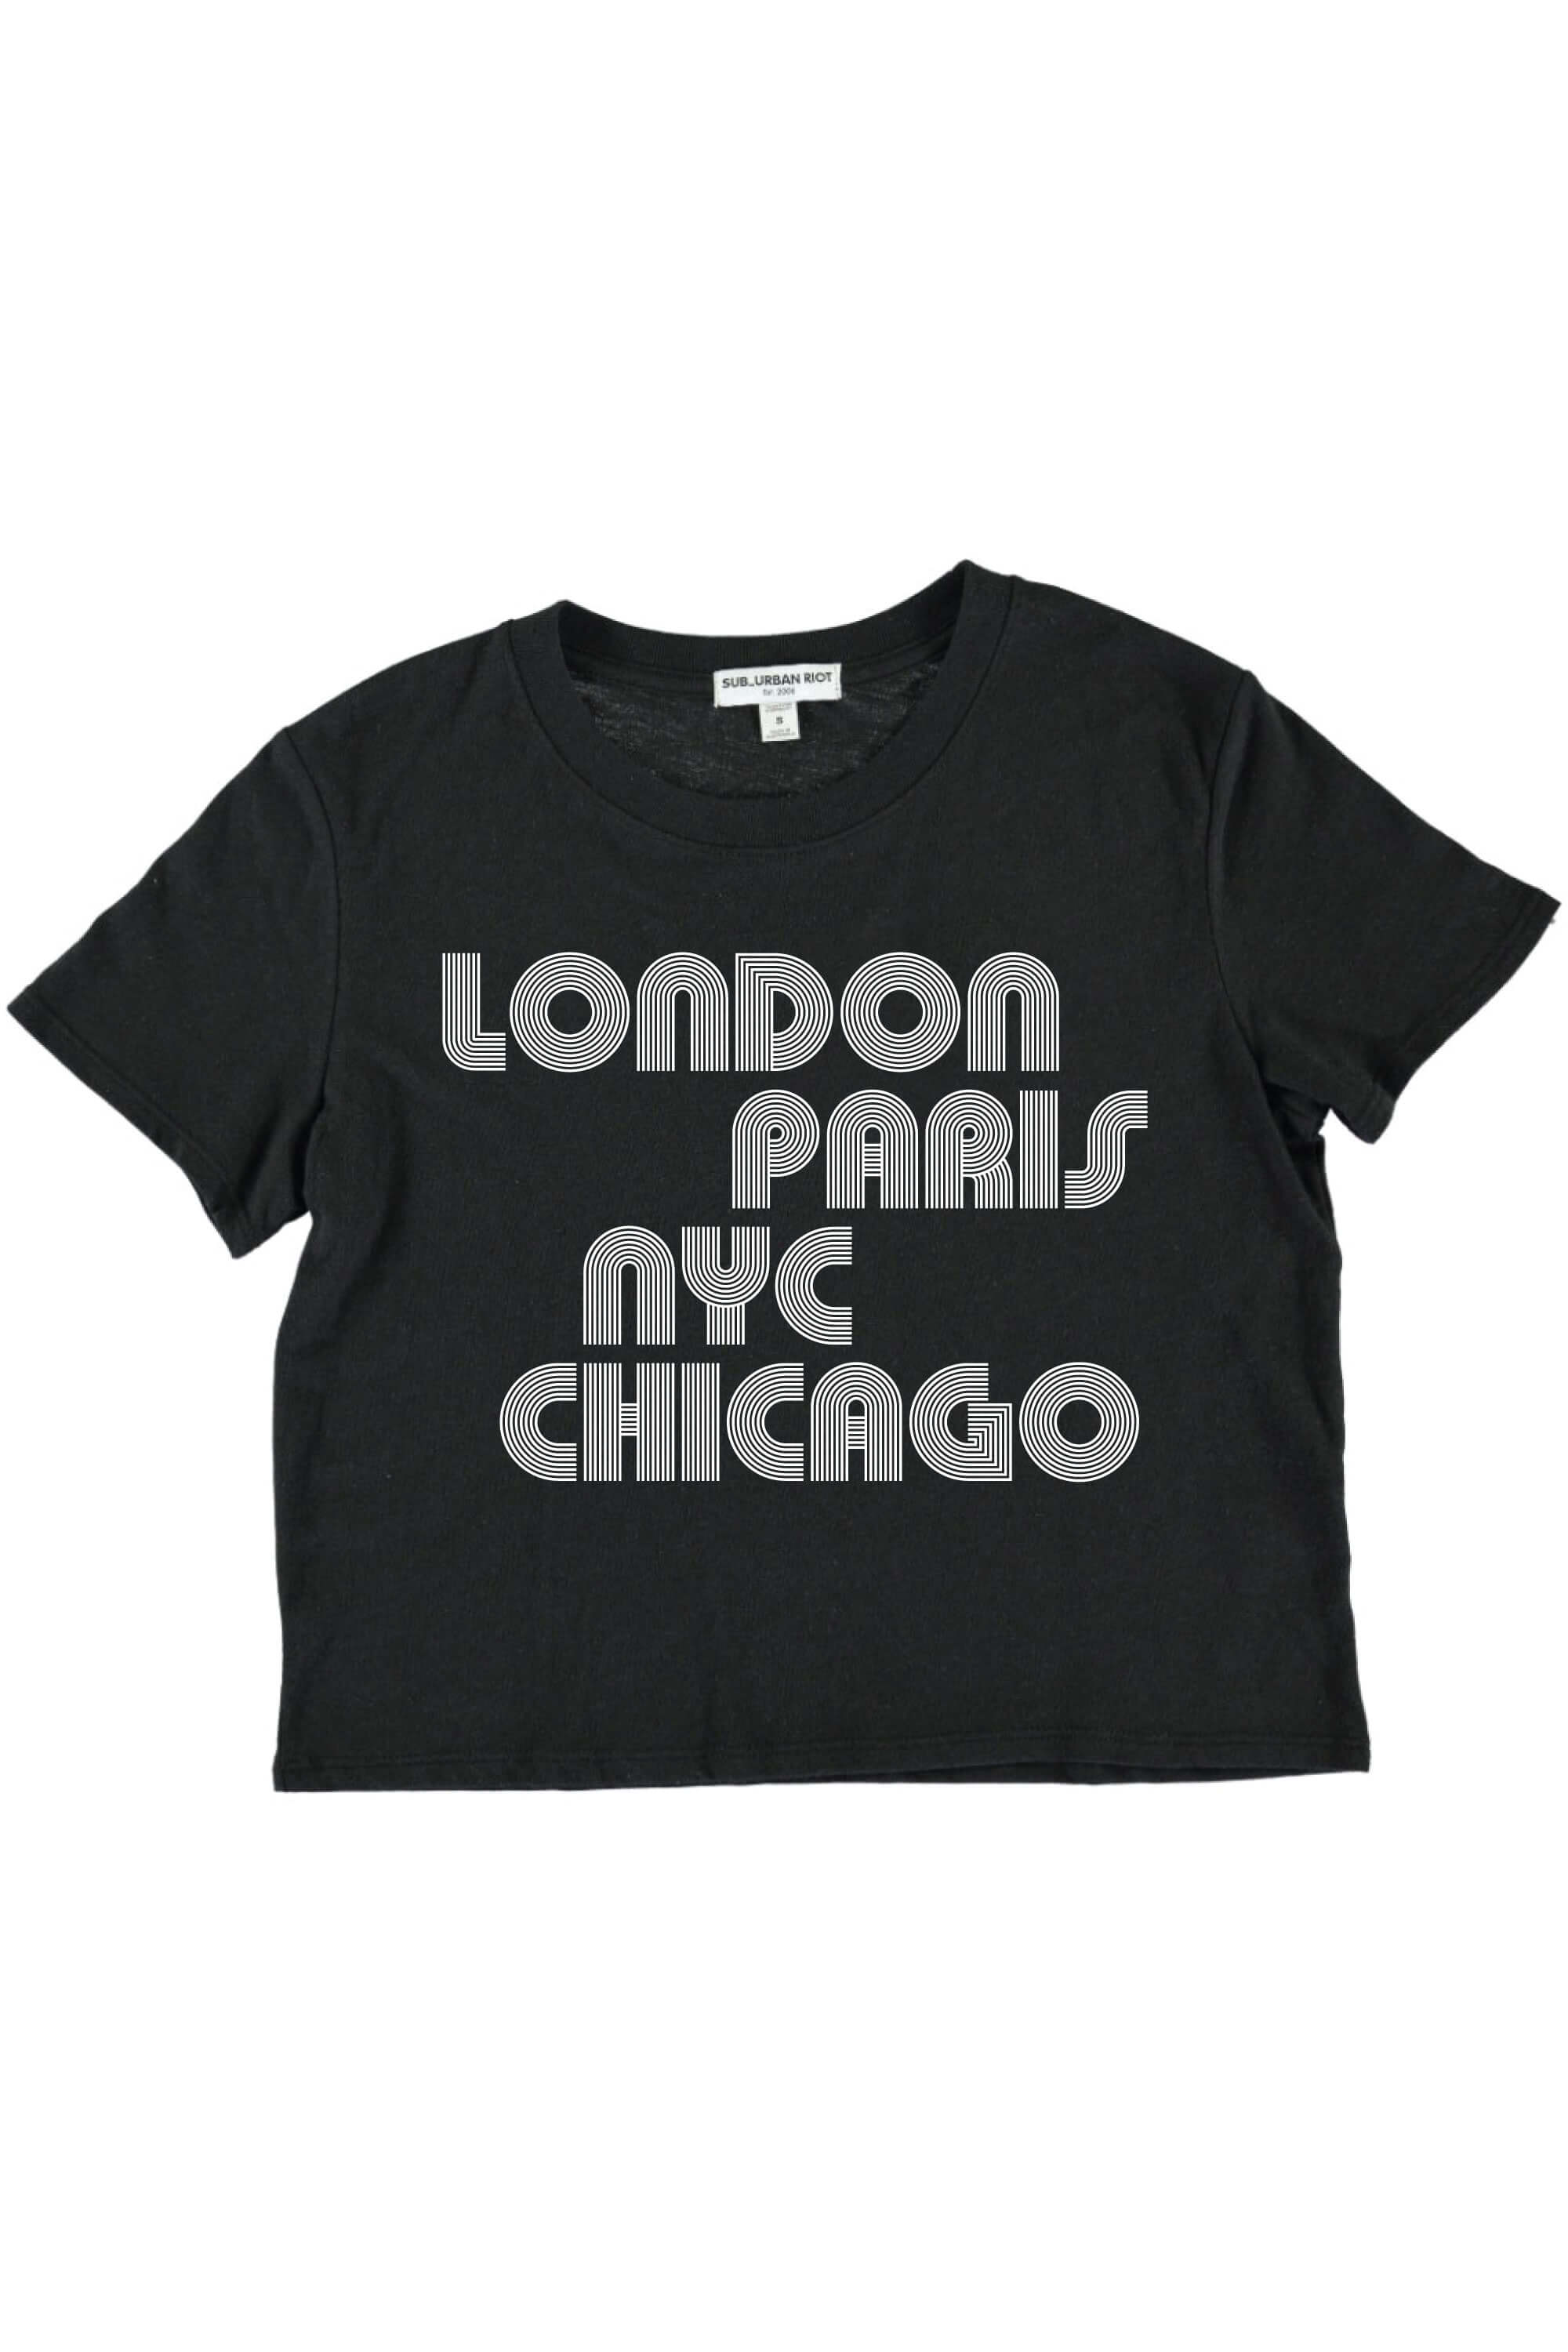 CITIES YOUTH SIZE CROP TEE